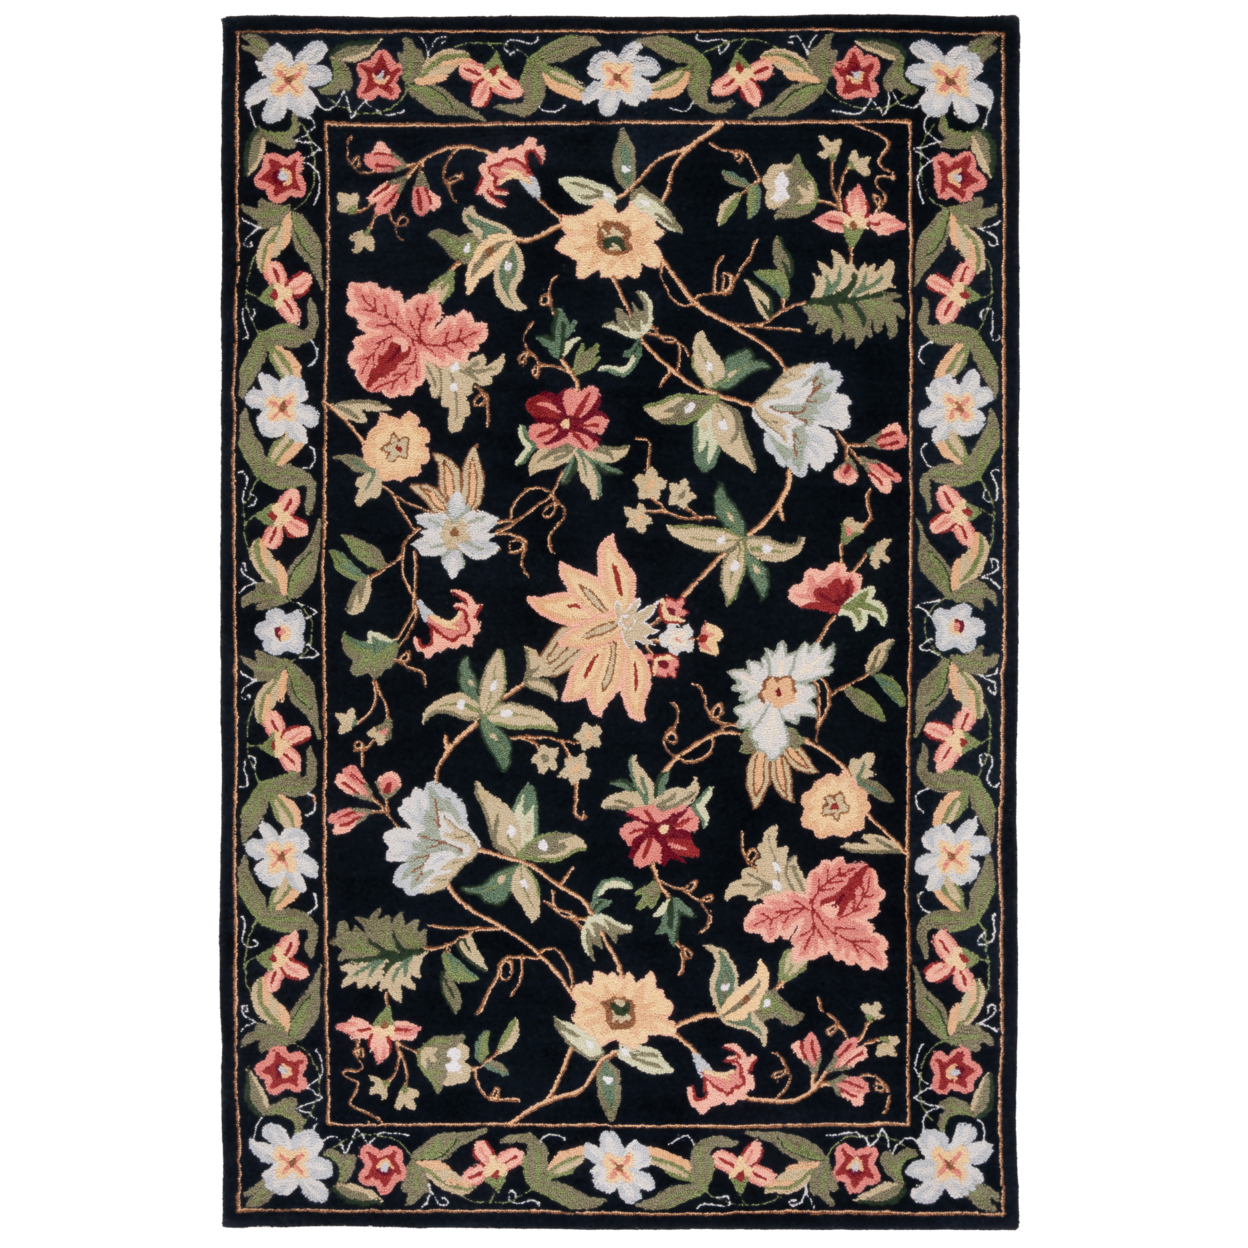 SAFAVIEH Chelsea Collection HK311A Hand-hooked Black Rug - 10' Square